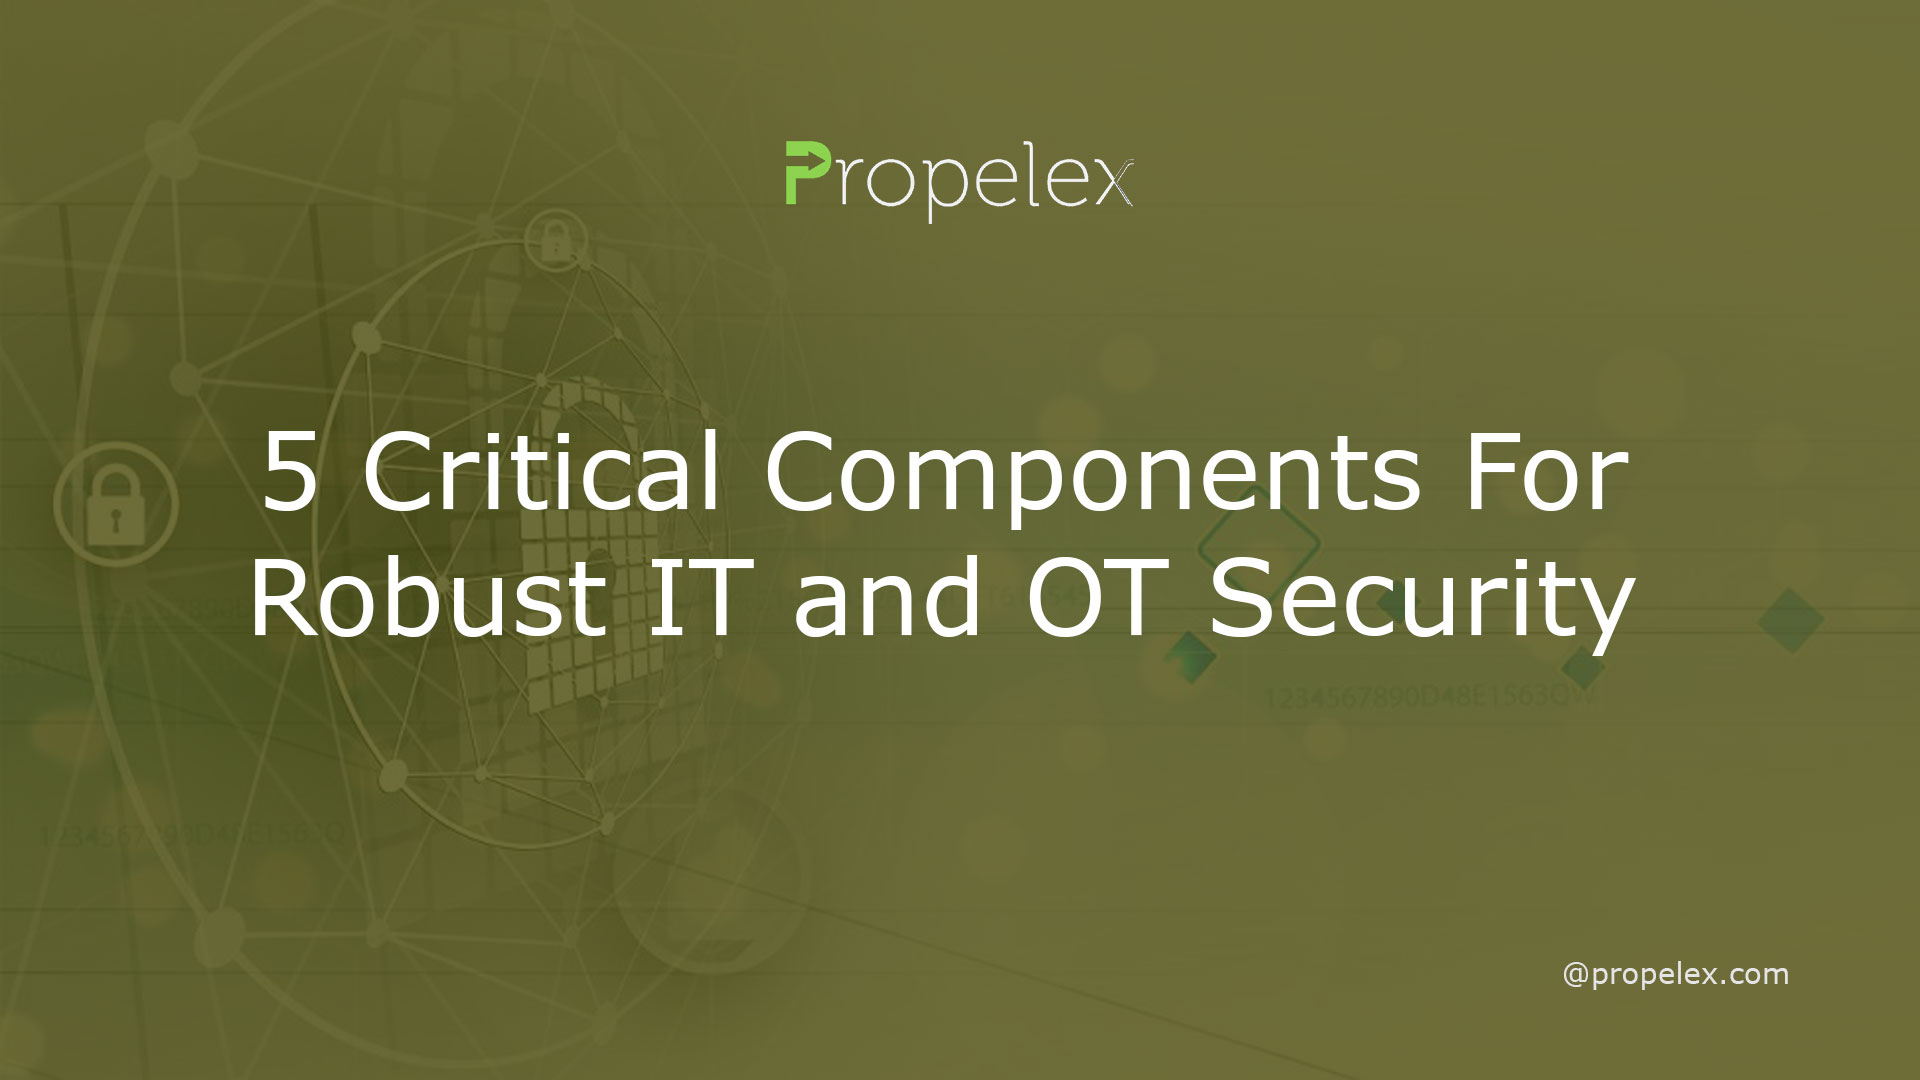 5 Critical Components For Robust IT and OT Security